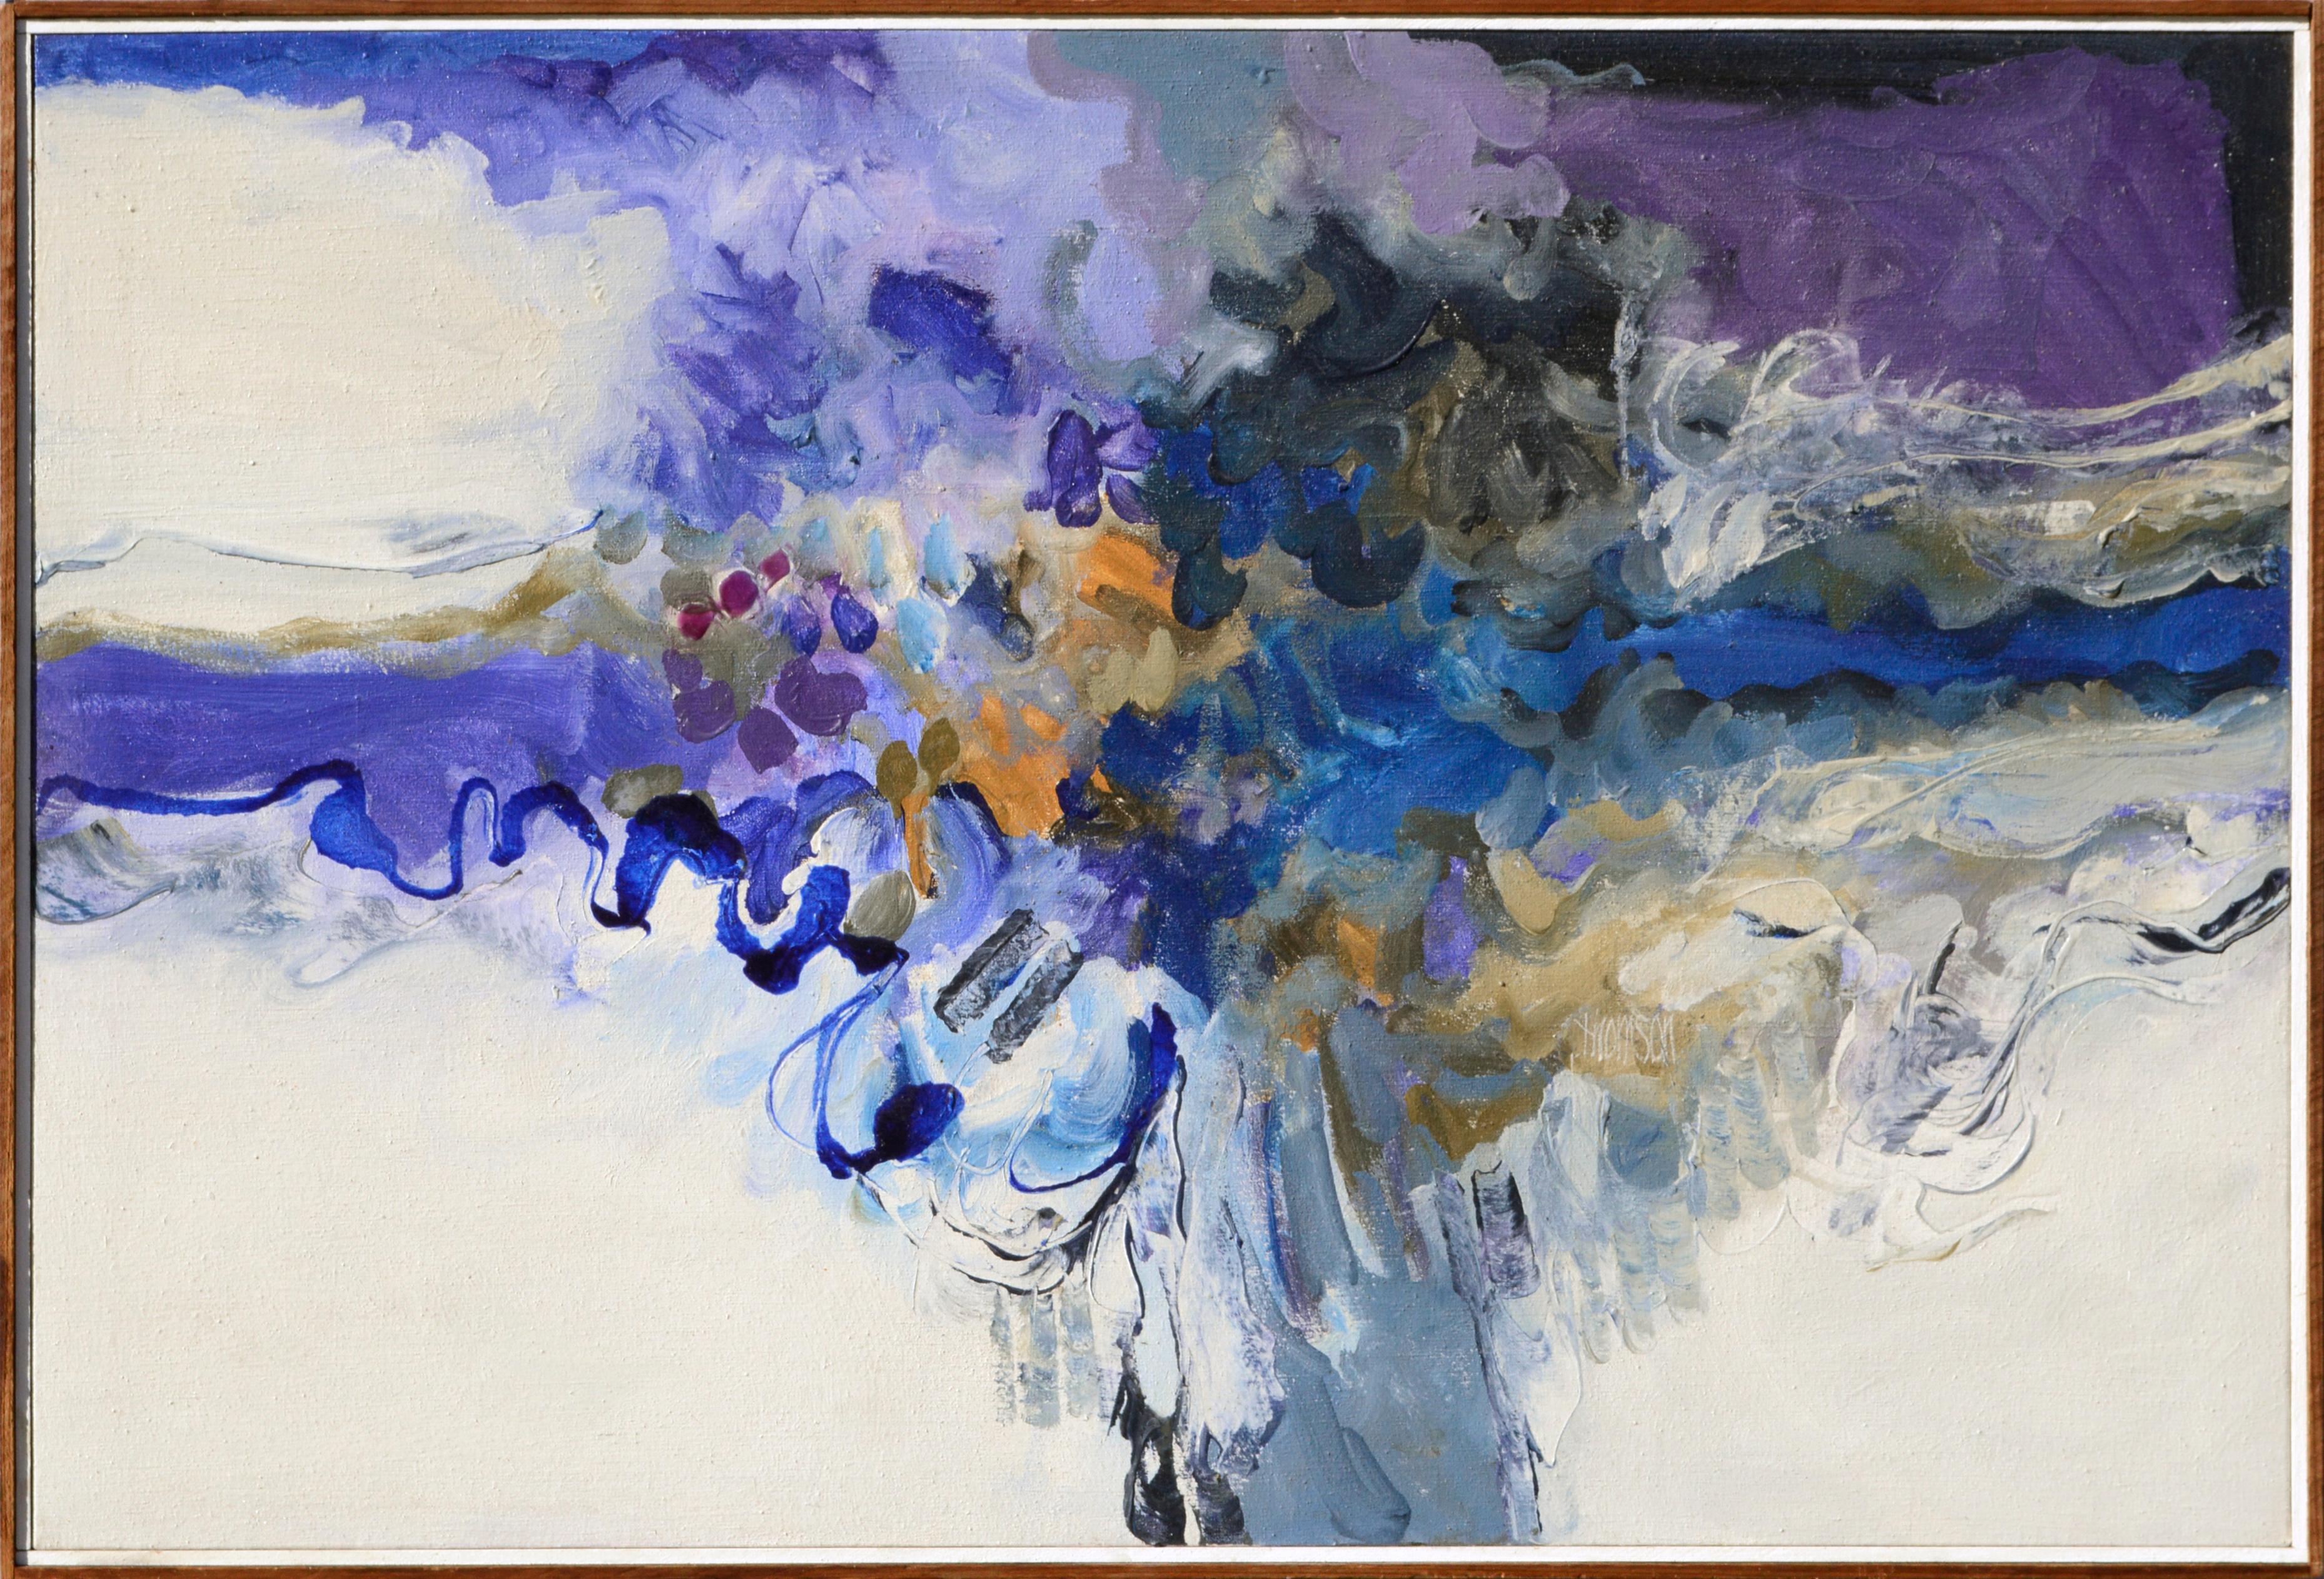 John O. Thomson Abstract Painting - "Lata-To-Do", 1970s Abstract Expressionist Composition w Purple, Blue, & Yellow 